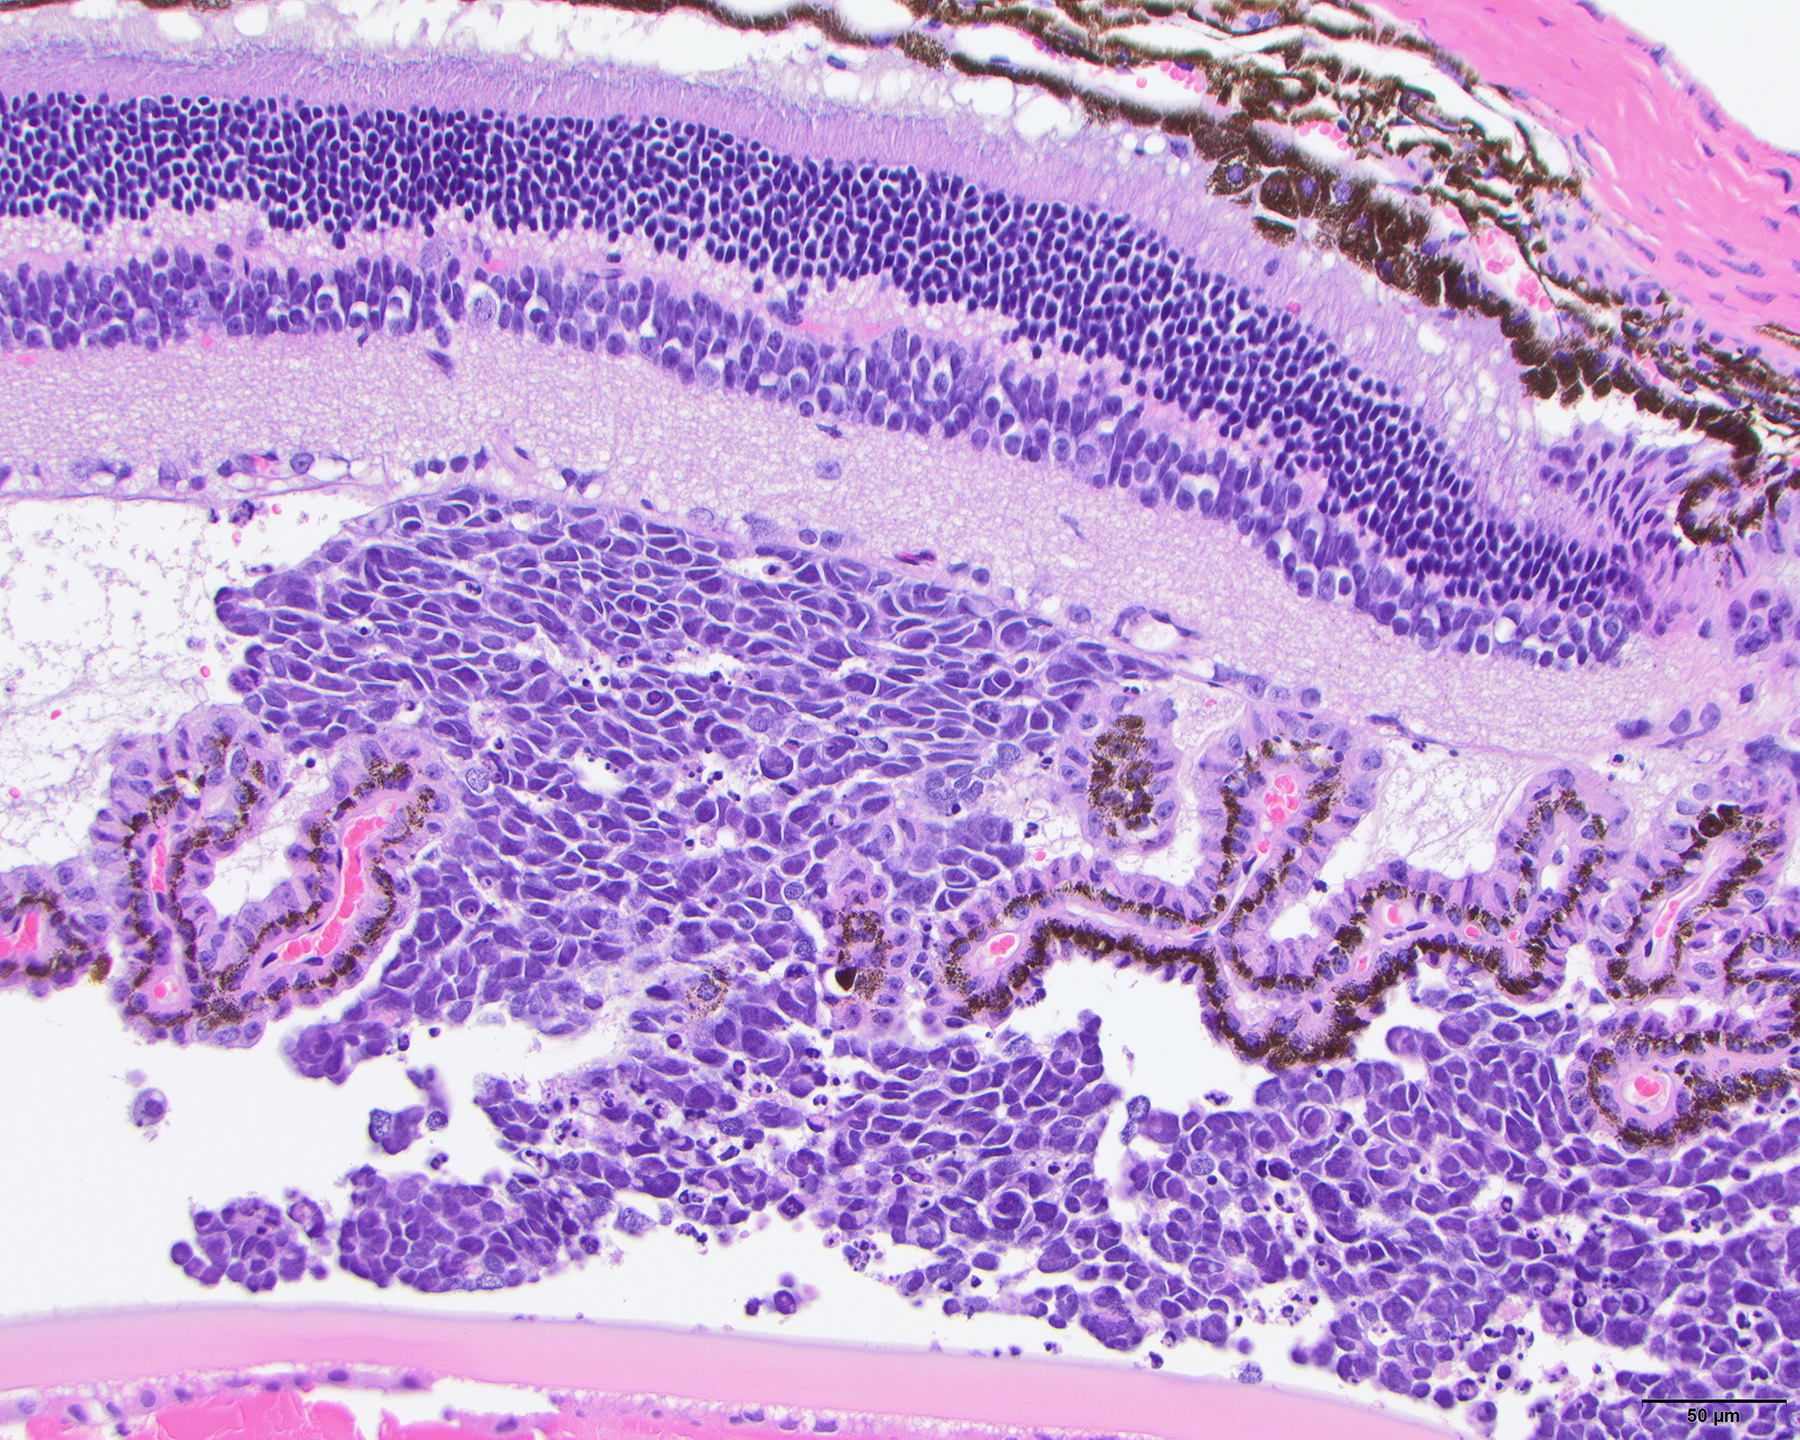 This stained image represents a retinoblastoma sample, much like researchers and physicians can request. The top section of the image is the retina, followed by xenografted retinoblastoma cells.